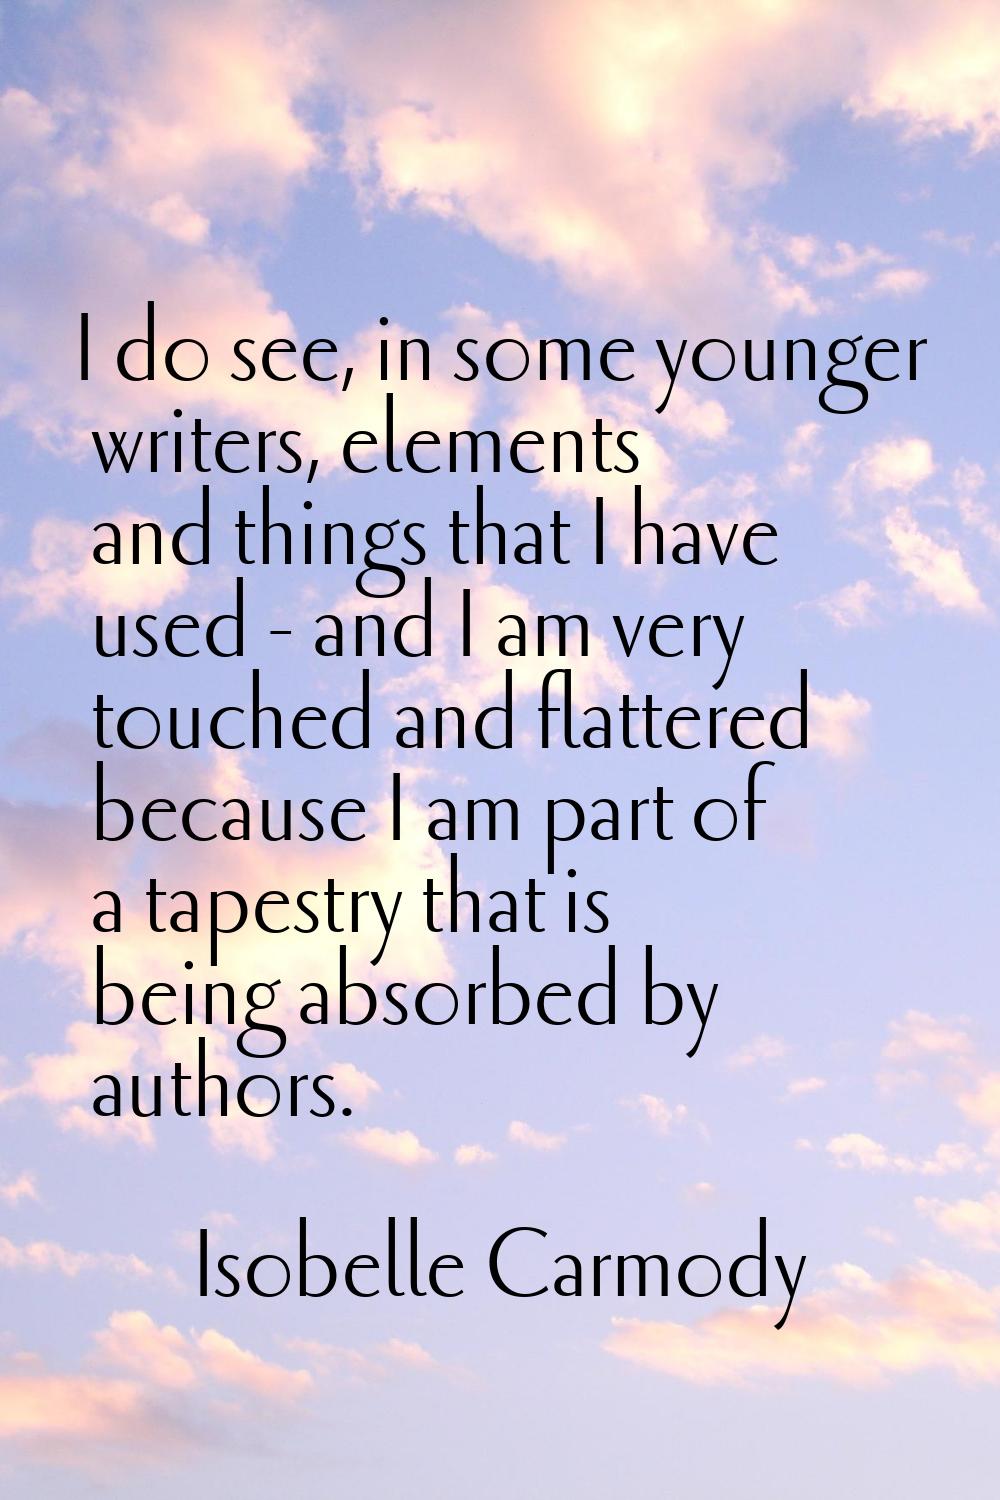 I do see, in some younger writers, elements and things that I have used - and I am very touched and